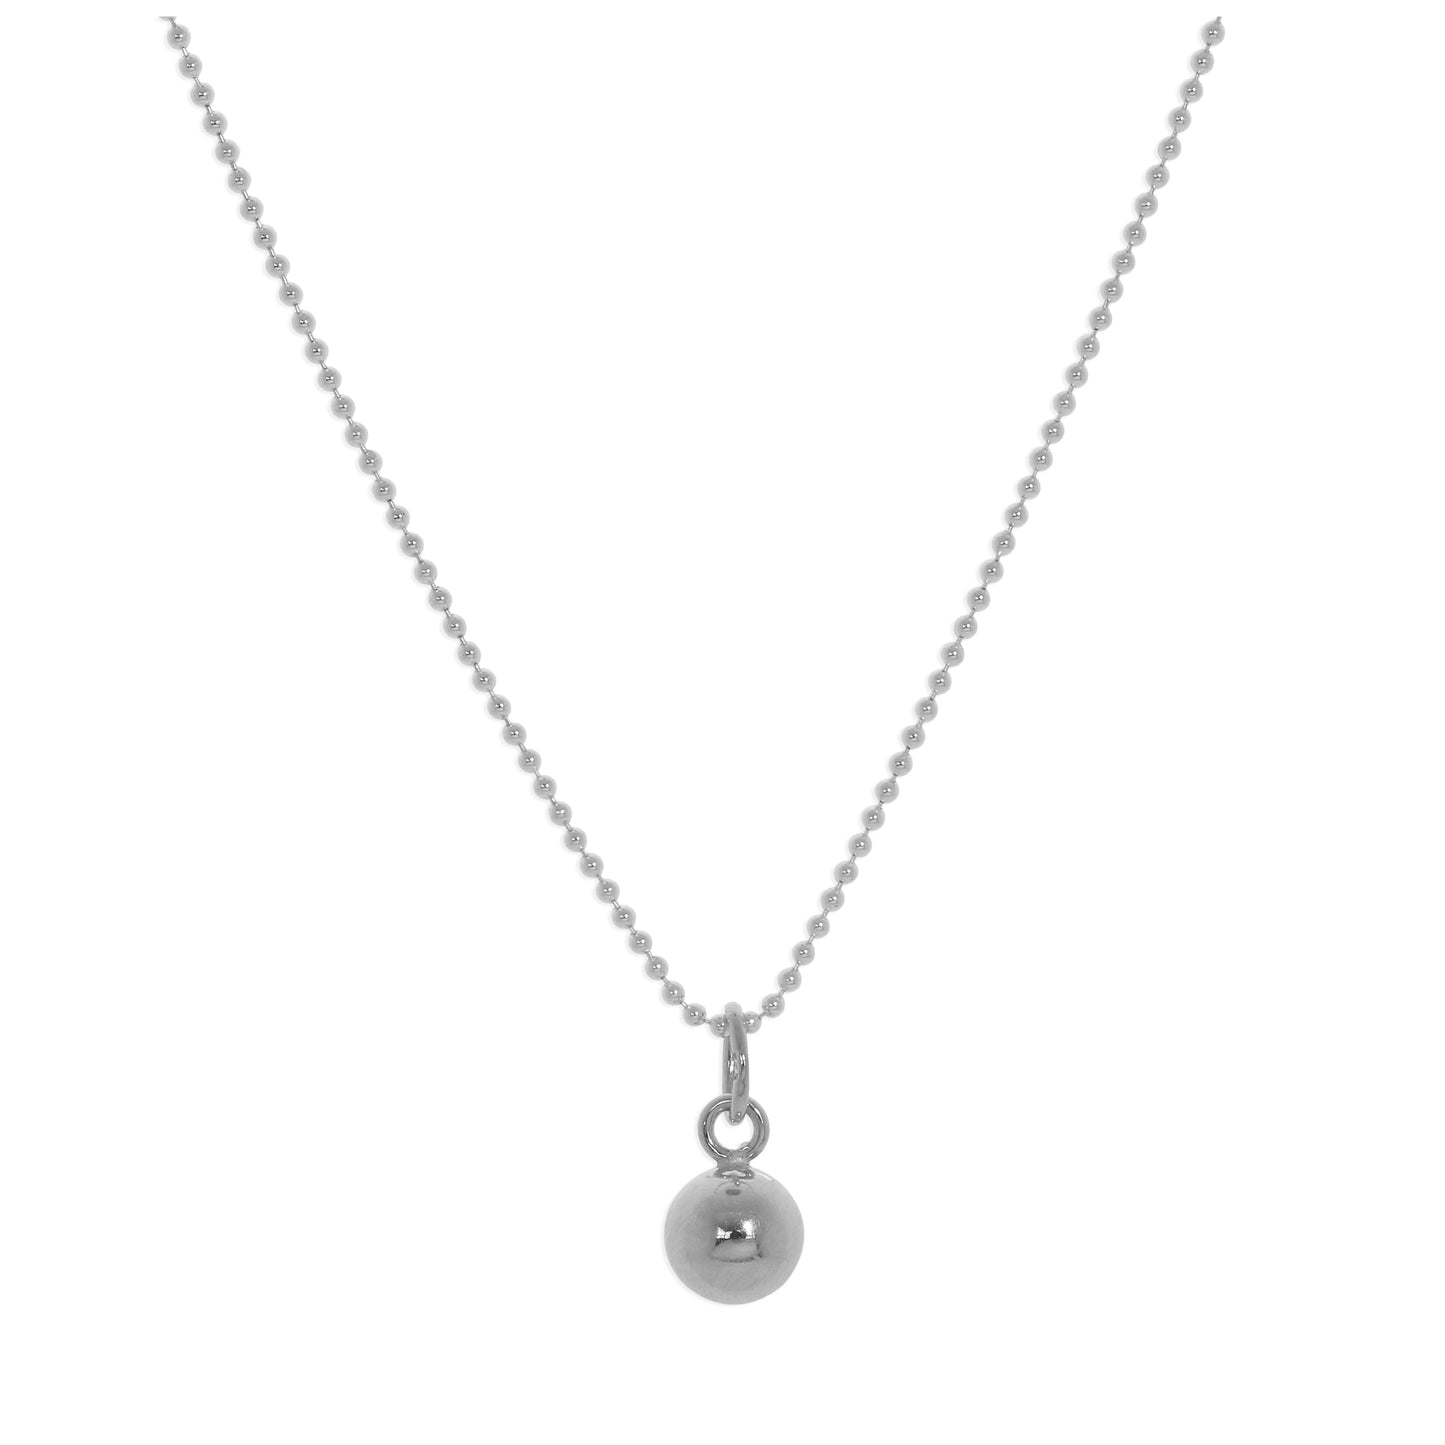 Sterling Silver Christmas Bauble Necklace - 14 - 22 Inches